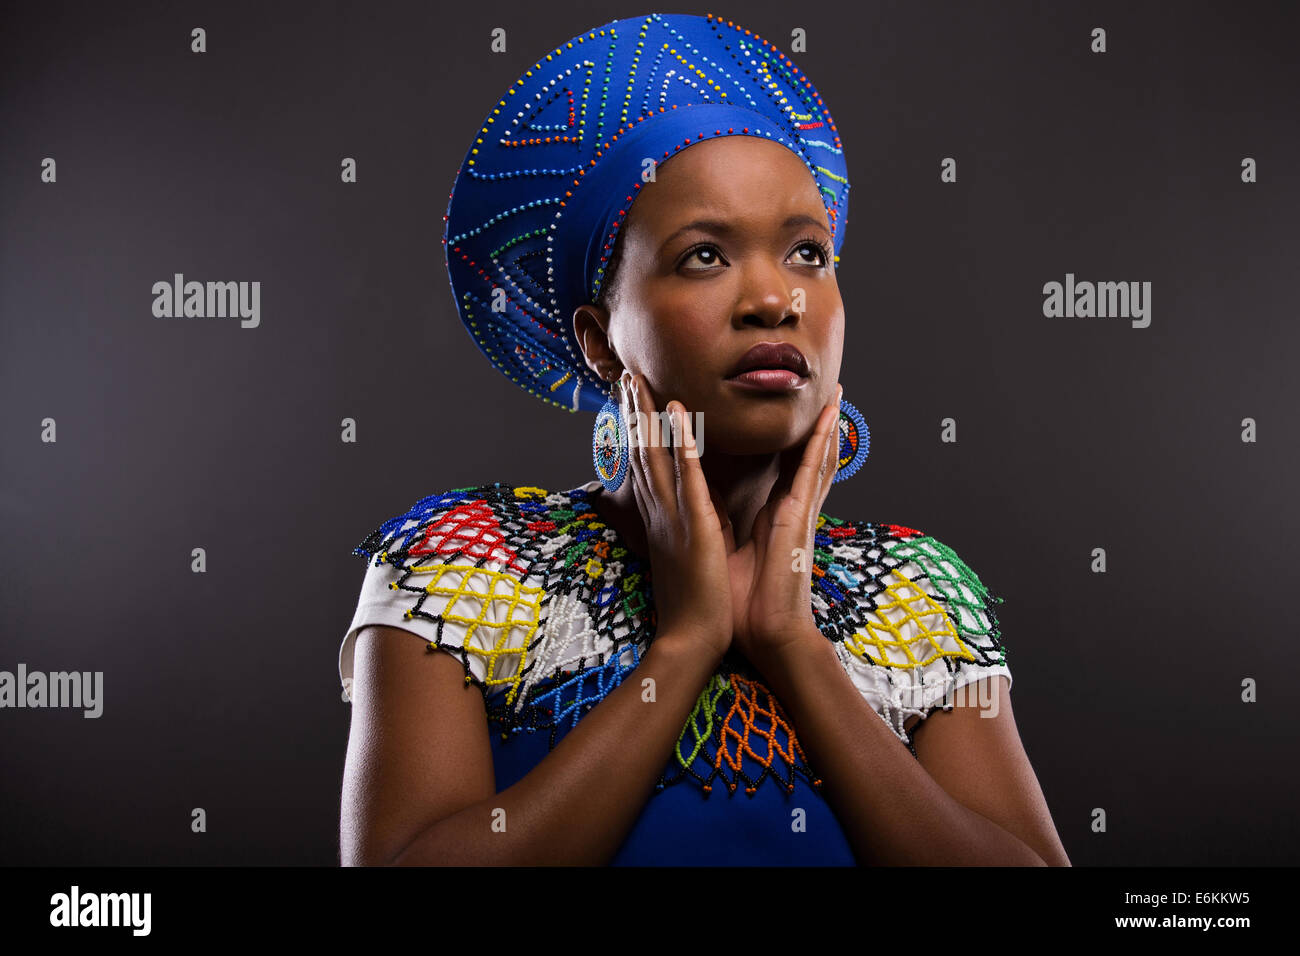 thoughtful African zulu woman looking up isolated on black background Stock Photo